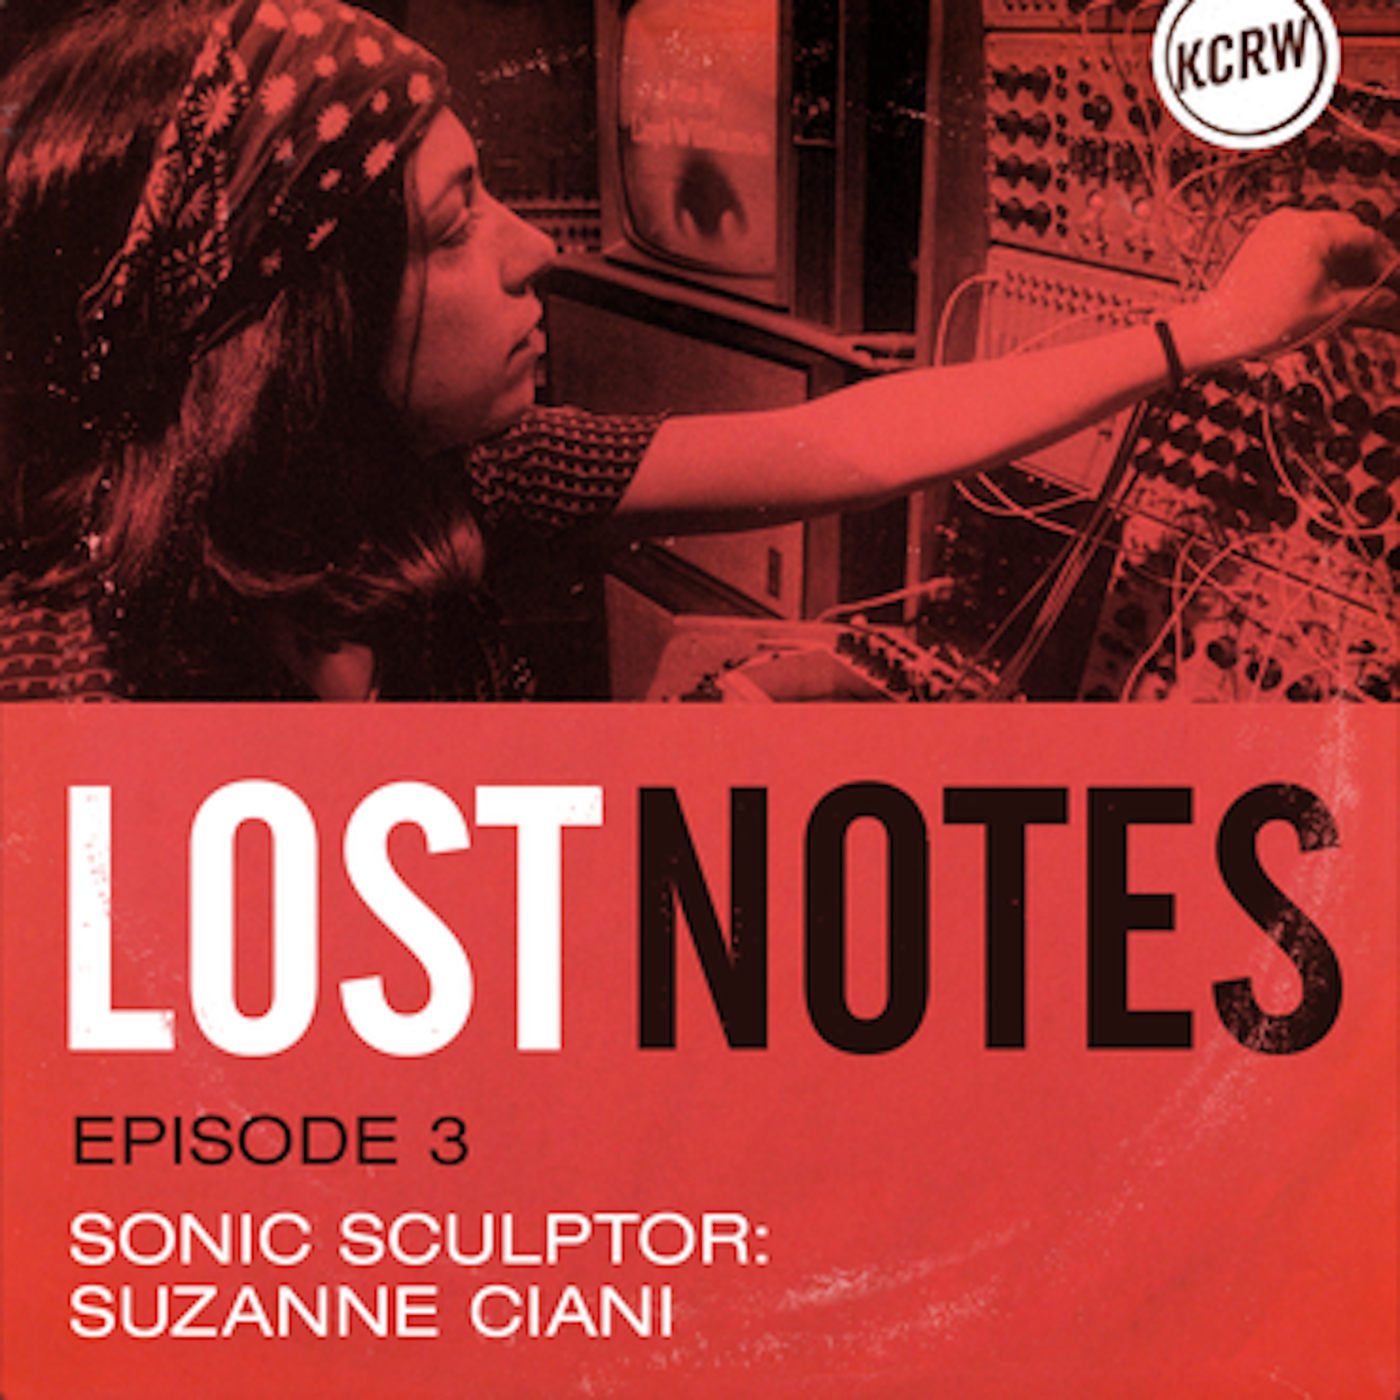 Lost Notes S2 Ep. 3: Sonic Sculptor: Suzanne Ciani